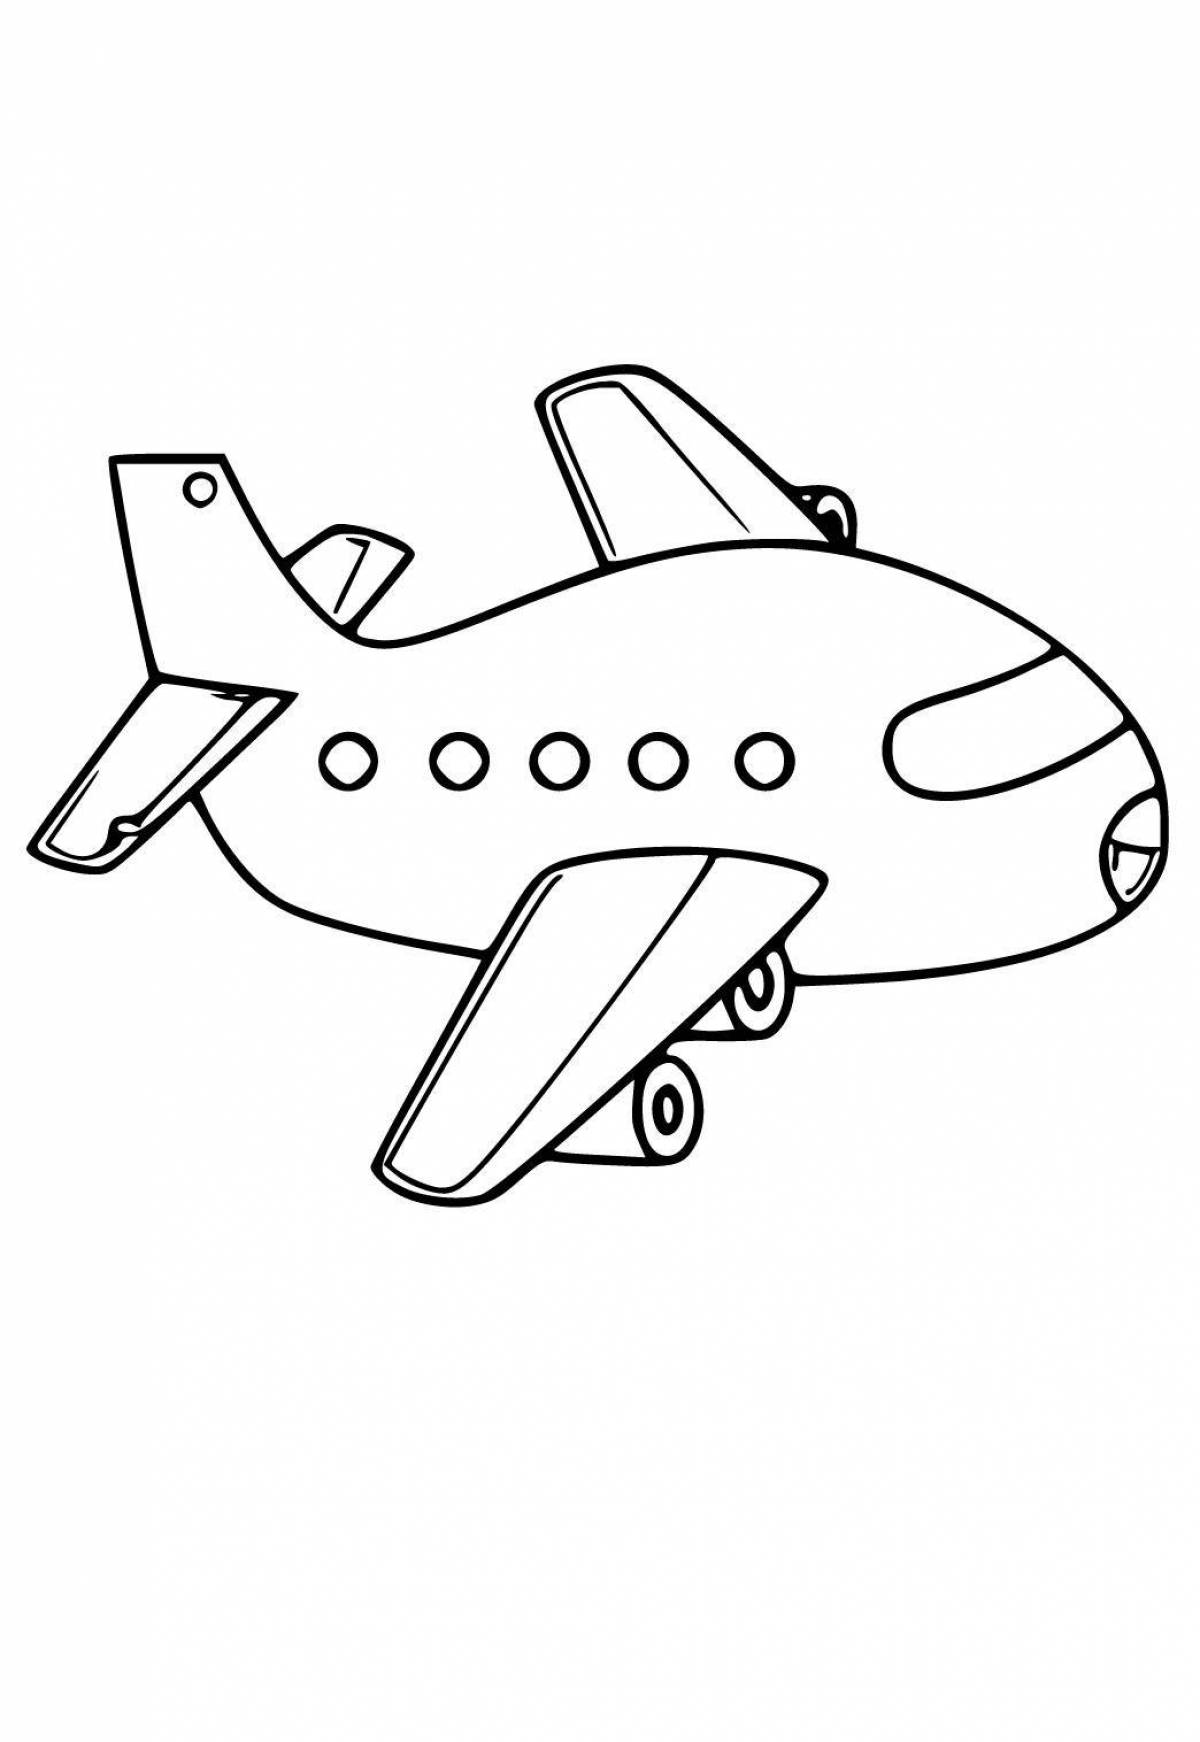 Fabulous planes coloring book for children 5-6 years old